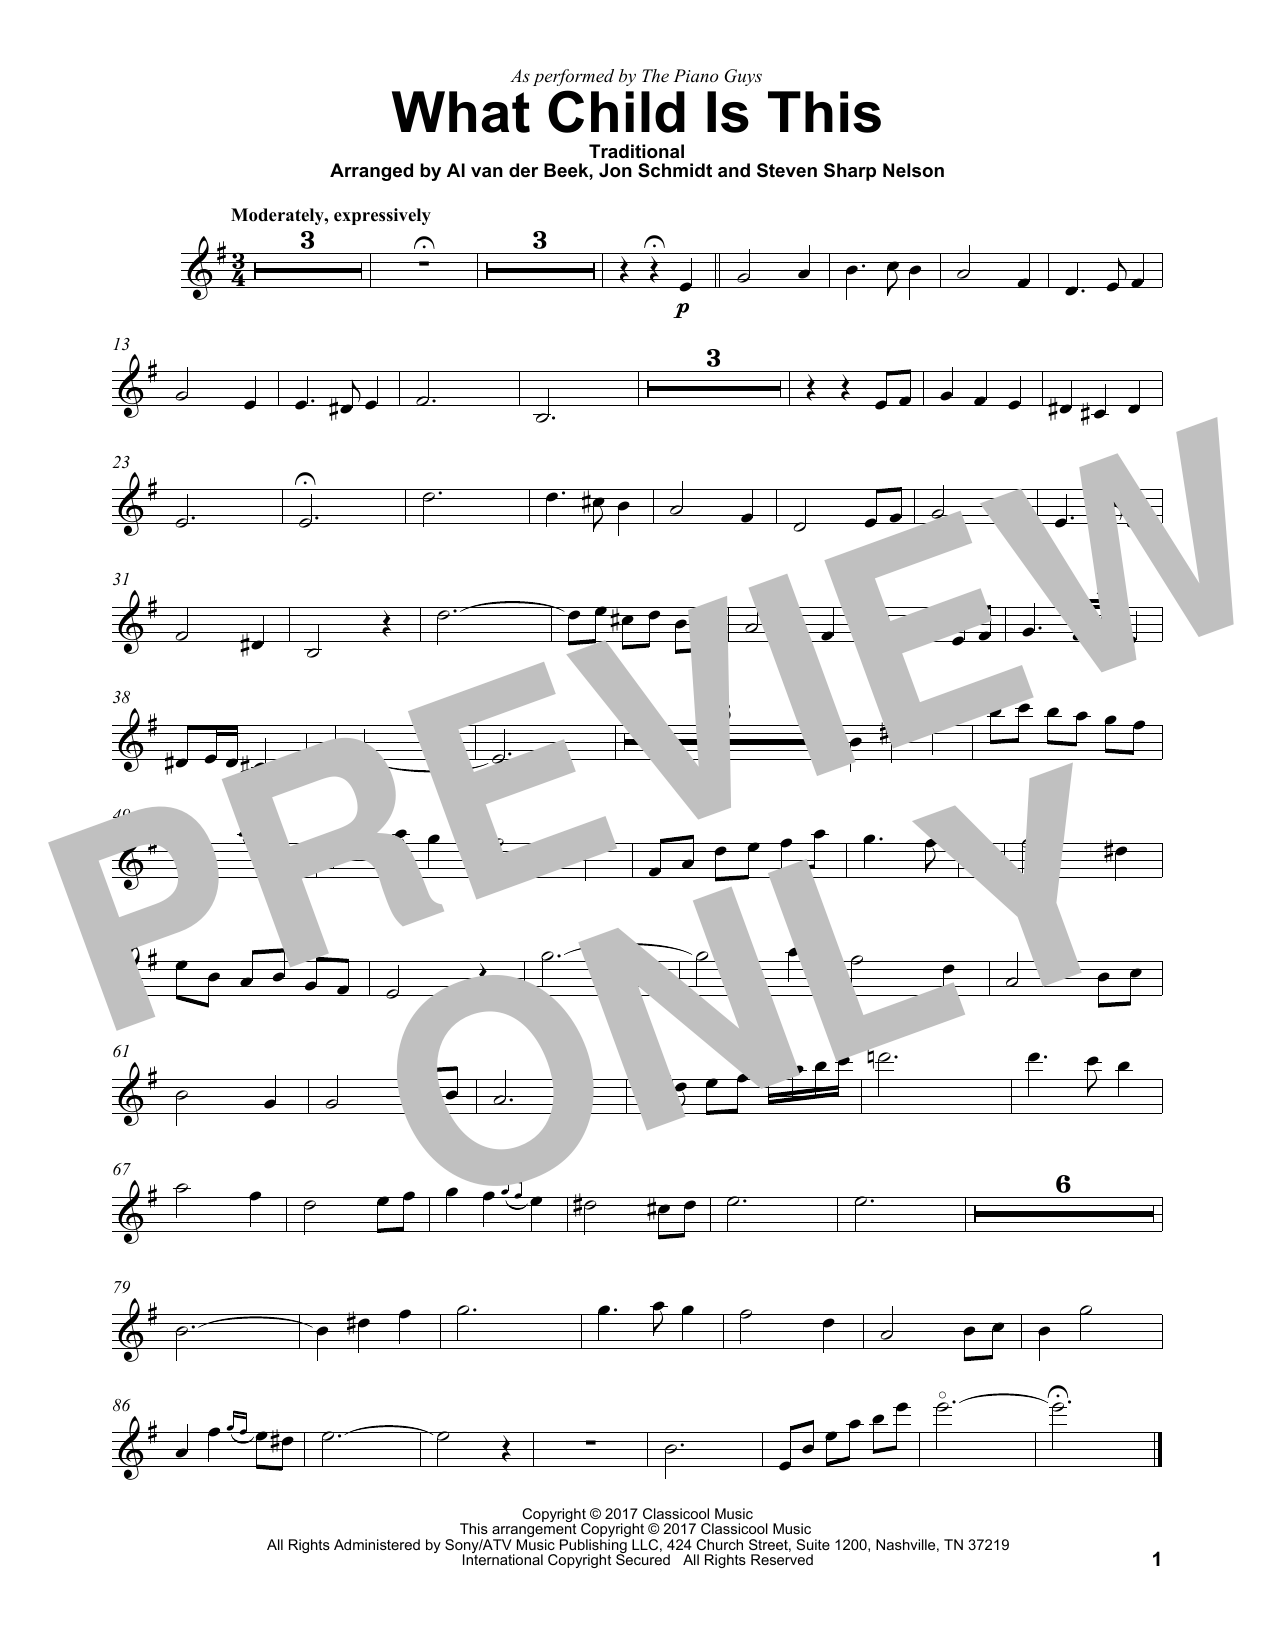 Download The Piano Guys What Child Is This Sheet Music